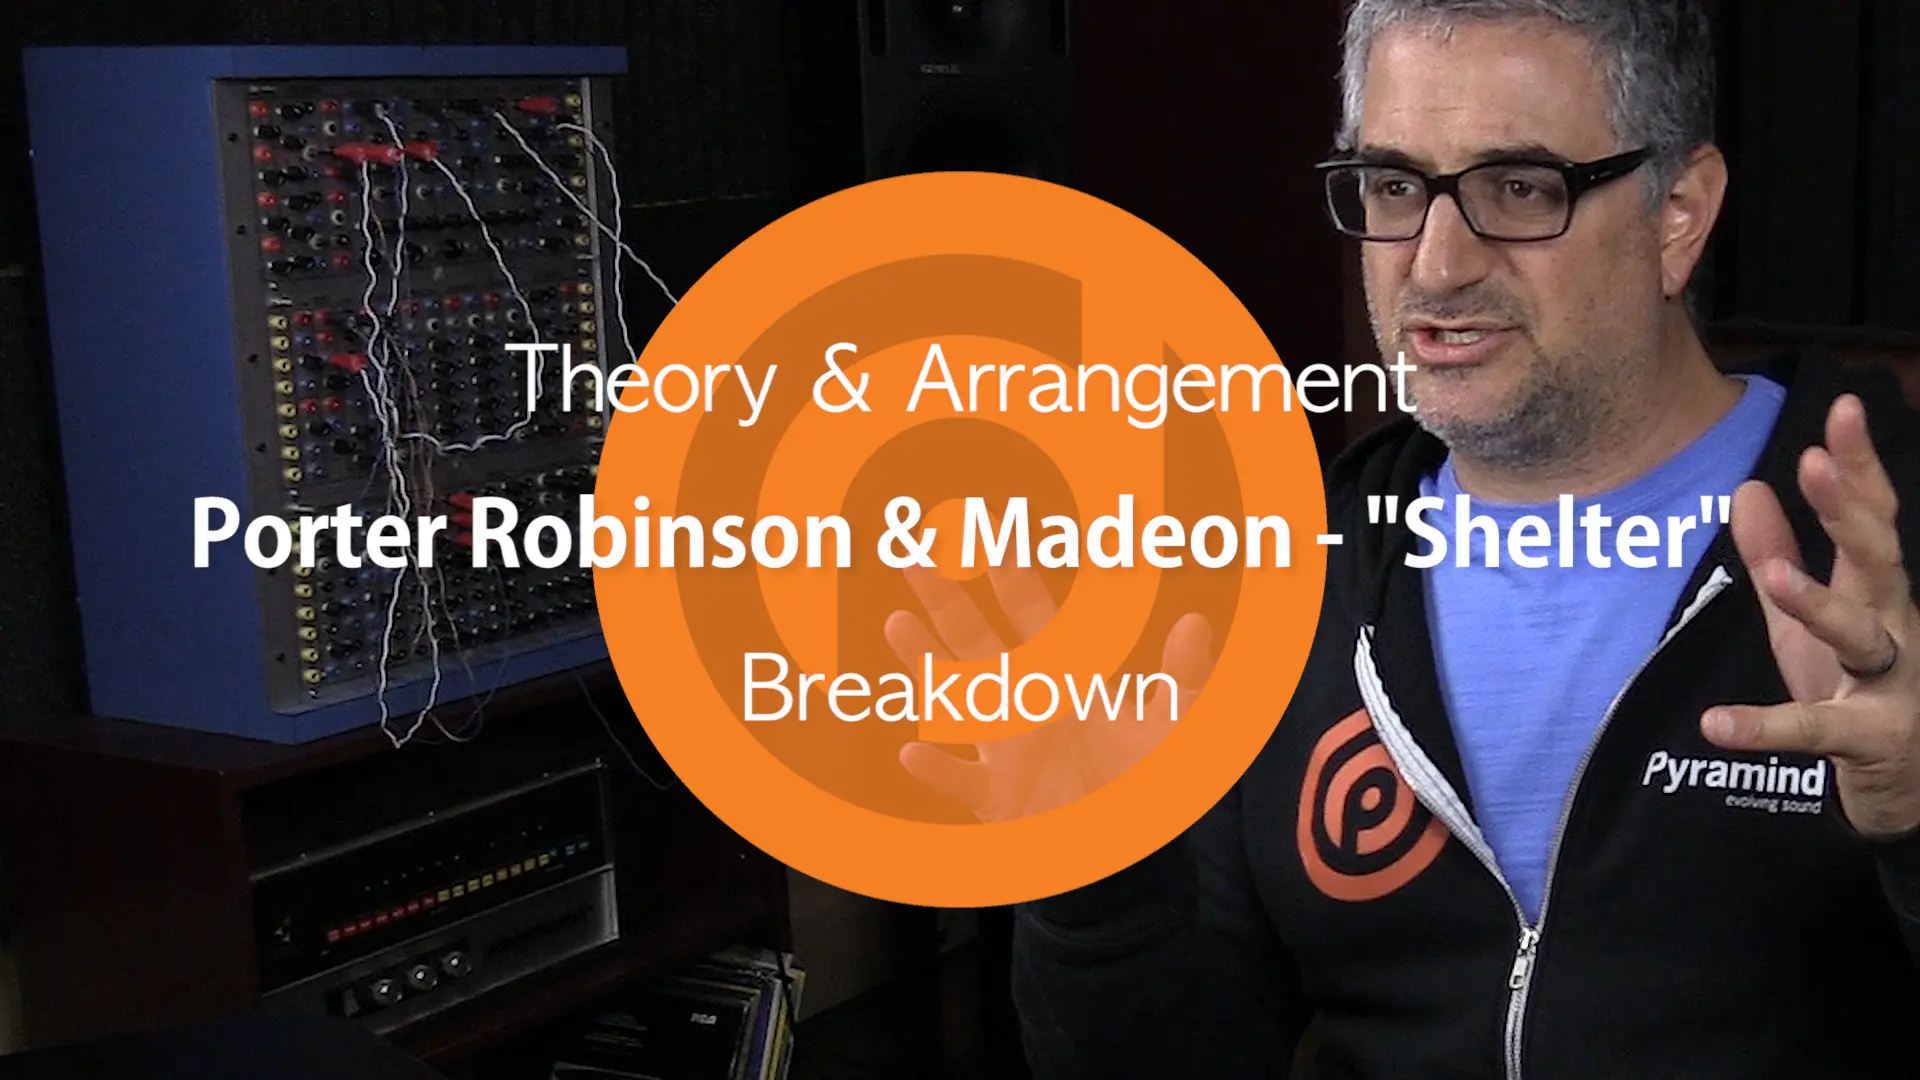 Theory & arrangement of Porter Robinson & Maddie Shelter breakdown for a music production program.